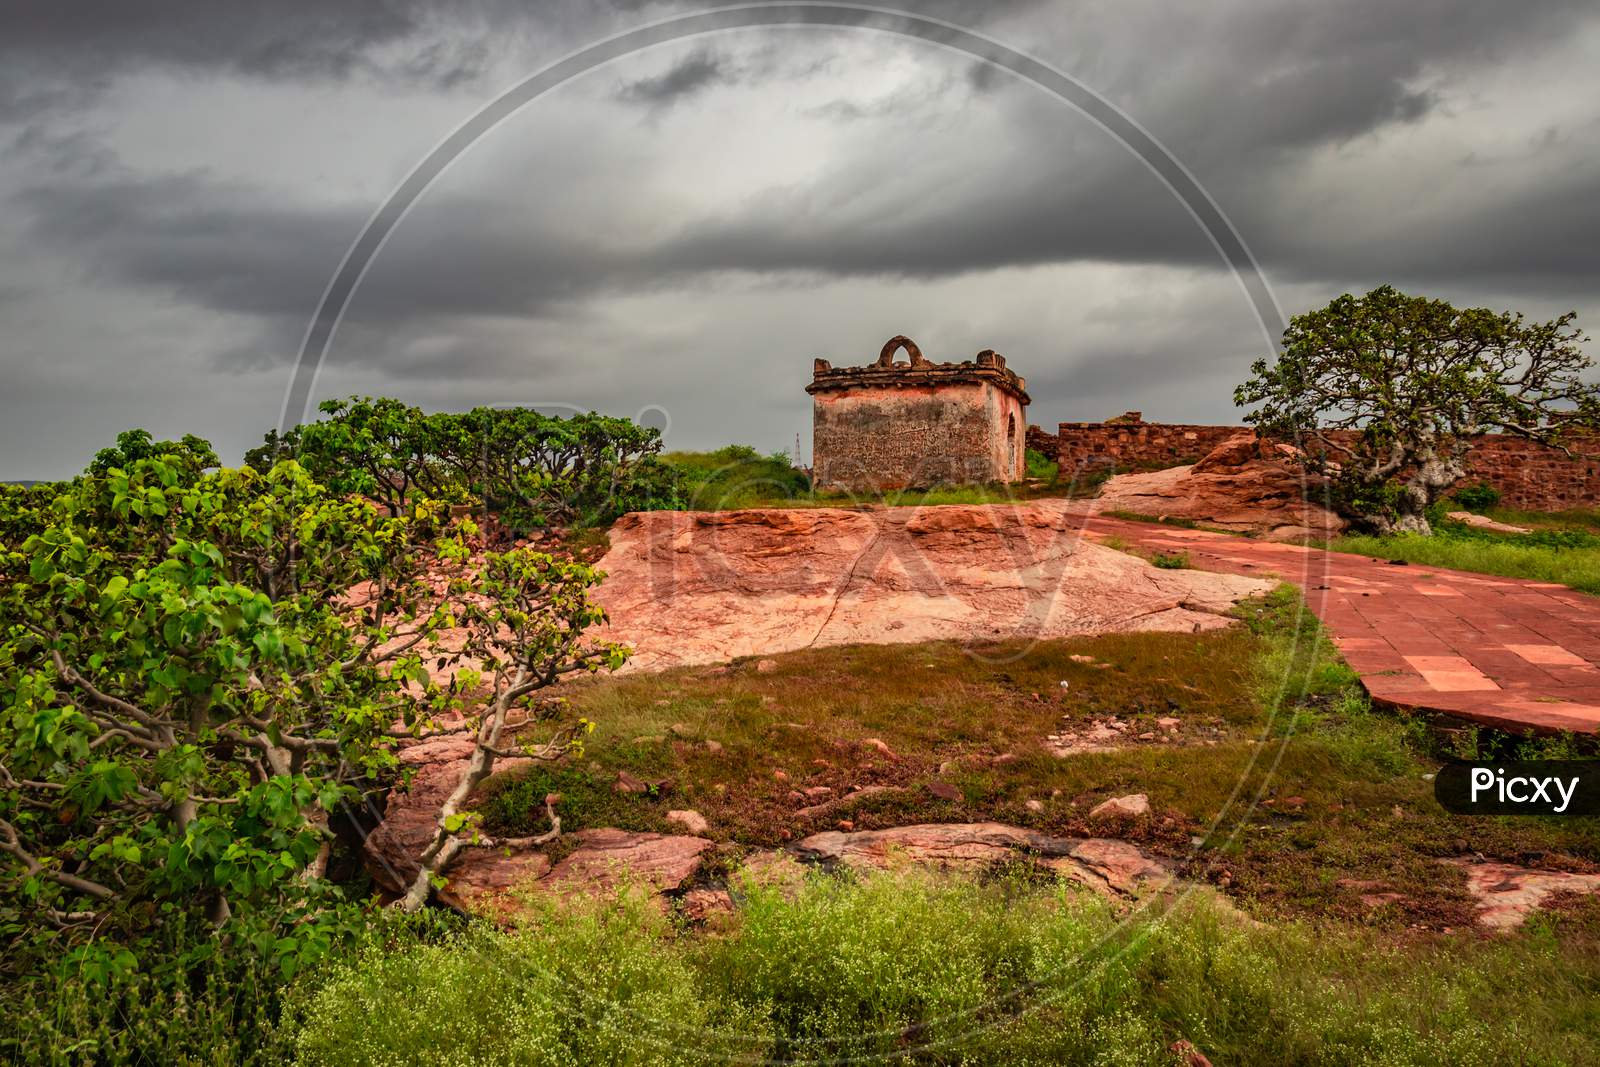 Ancient Fort Architecture With Amazing Sky From Flat Angle Shot